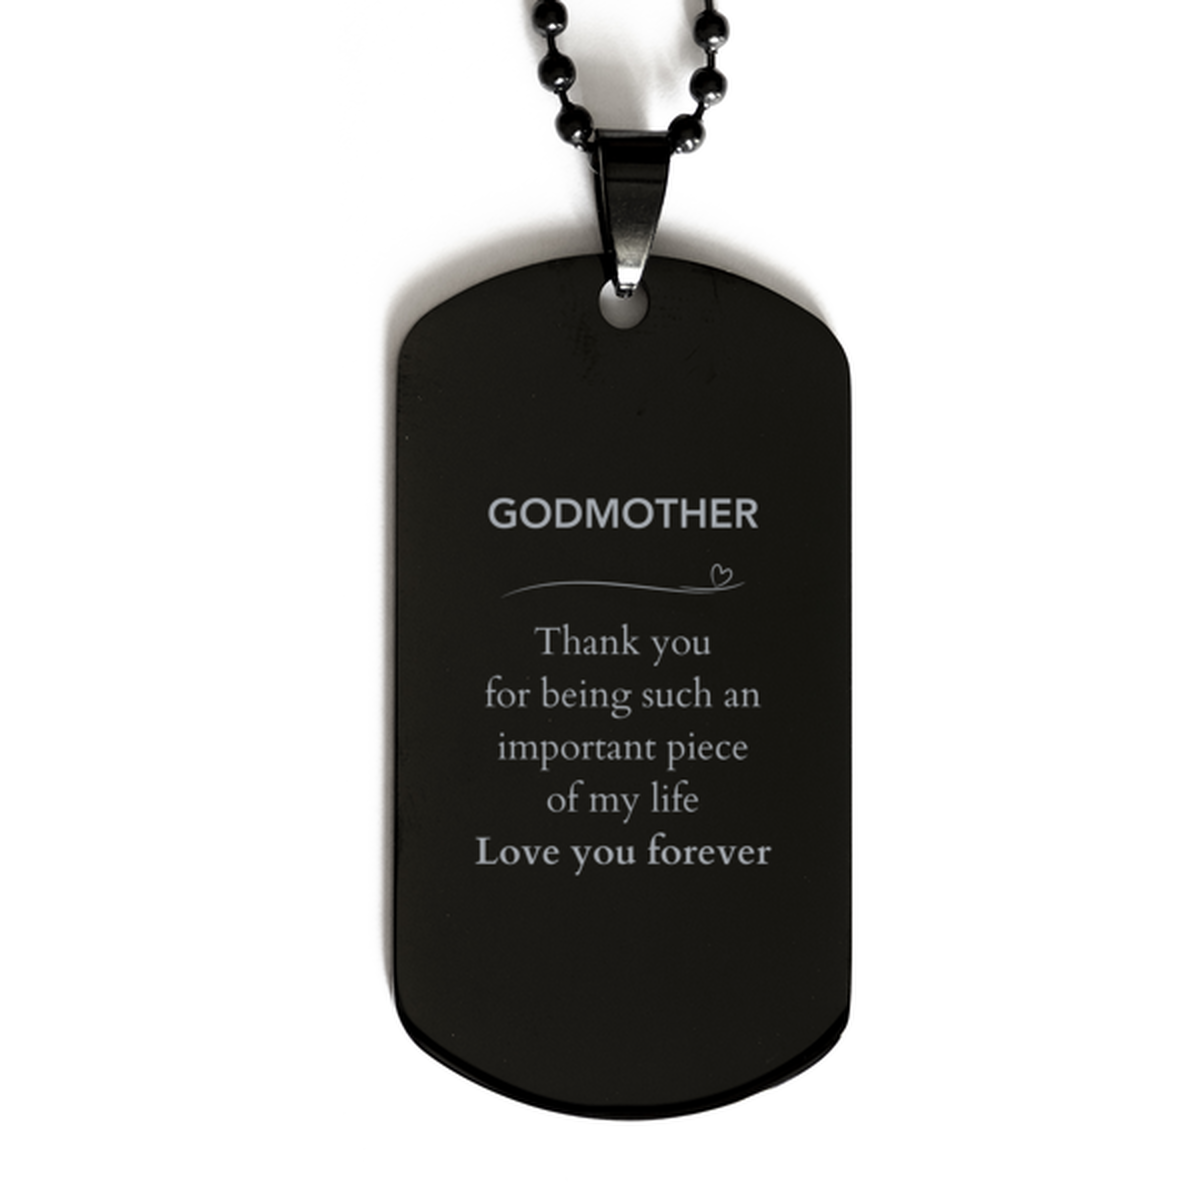 Appropriate Godmother Black Dog Tag Epic Birthday Gifts for Godmother Thank you for being such an important piece of my life Godmother Christmas Mothers Fathers Day